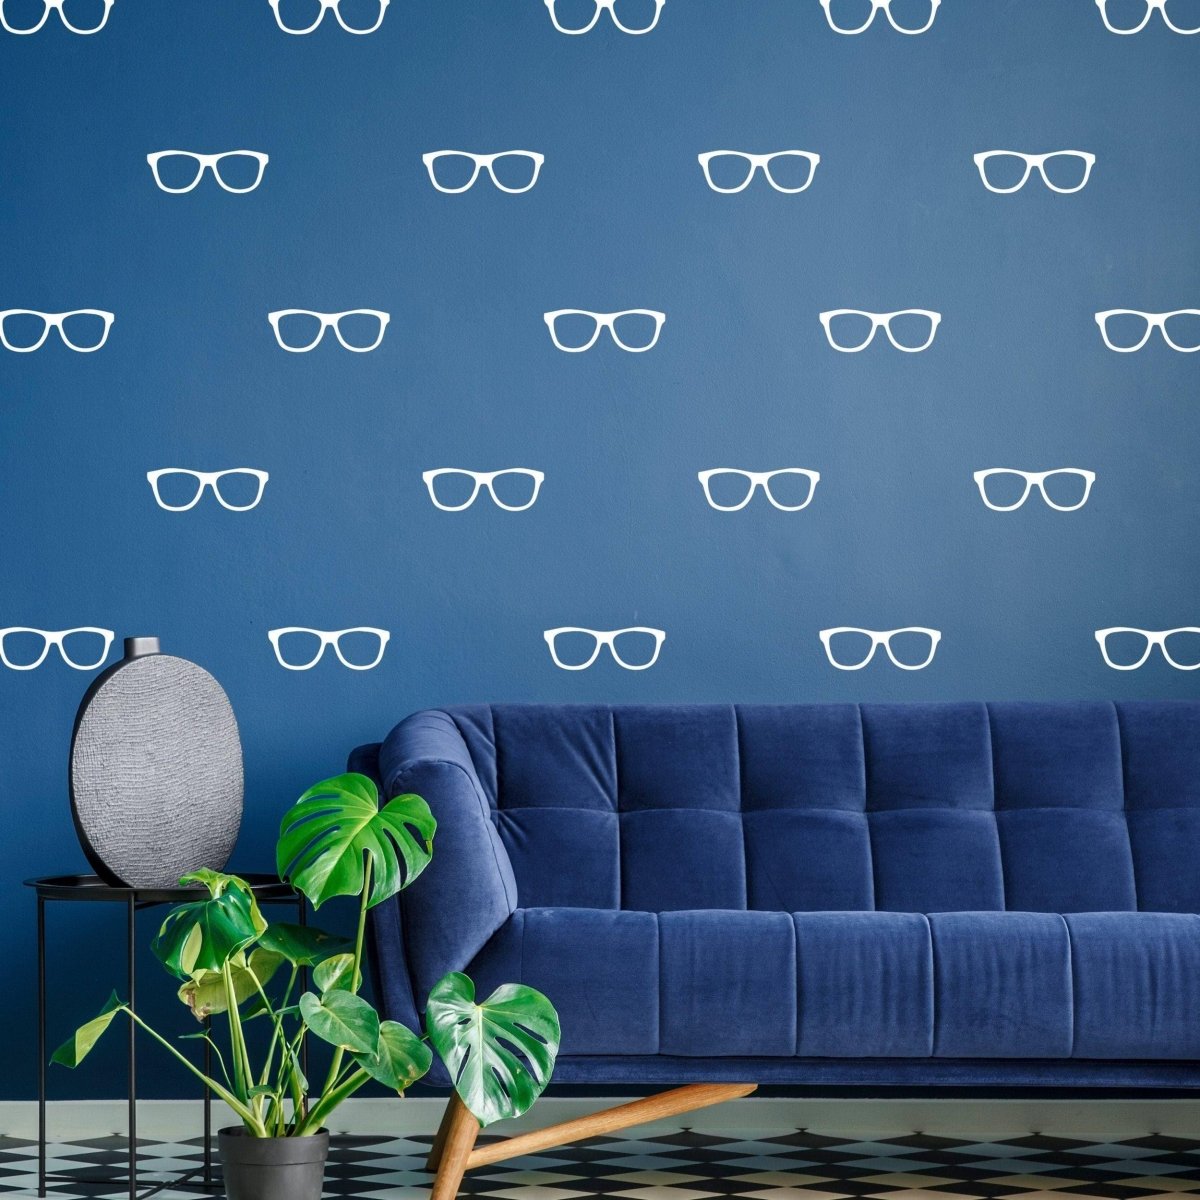 50x Spectacular Spectacles Wall Decals - Decords